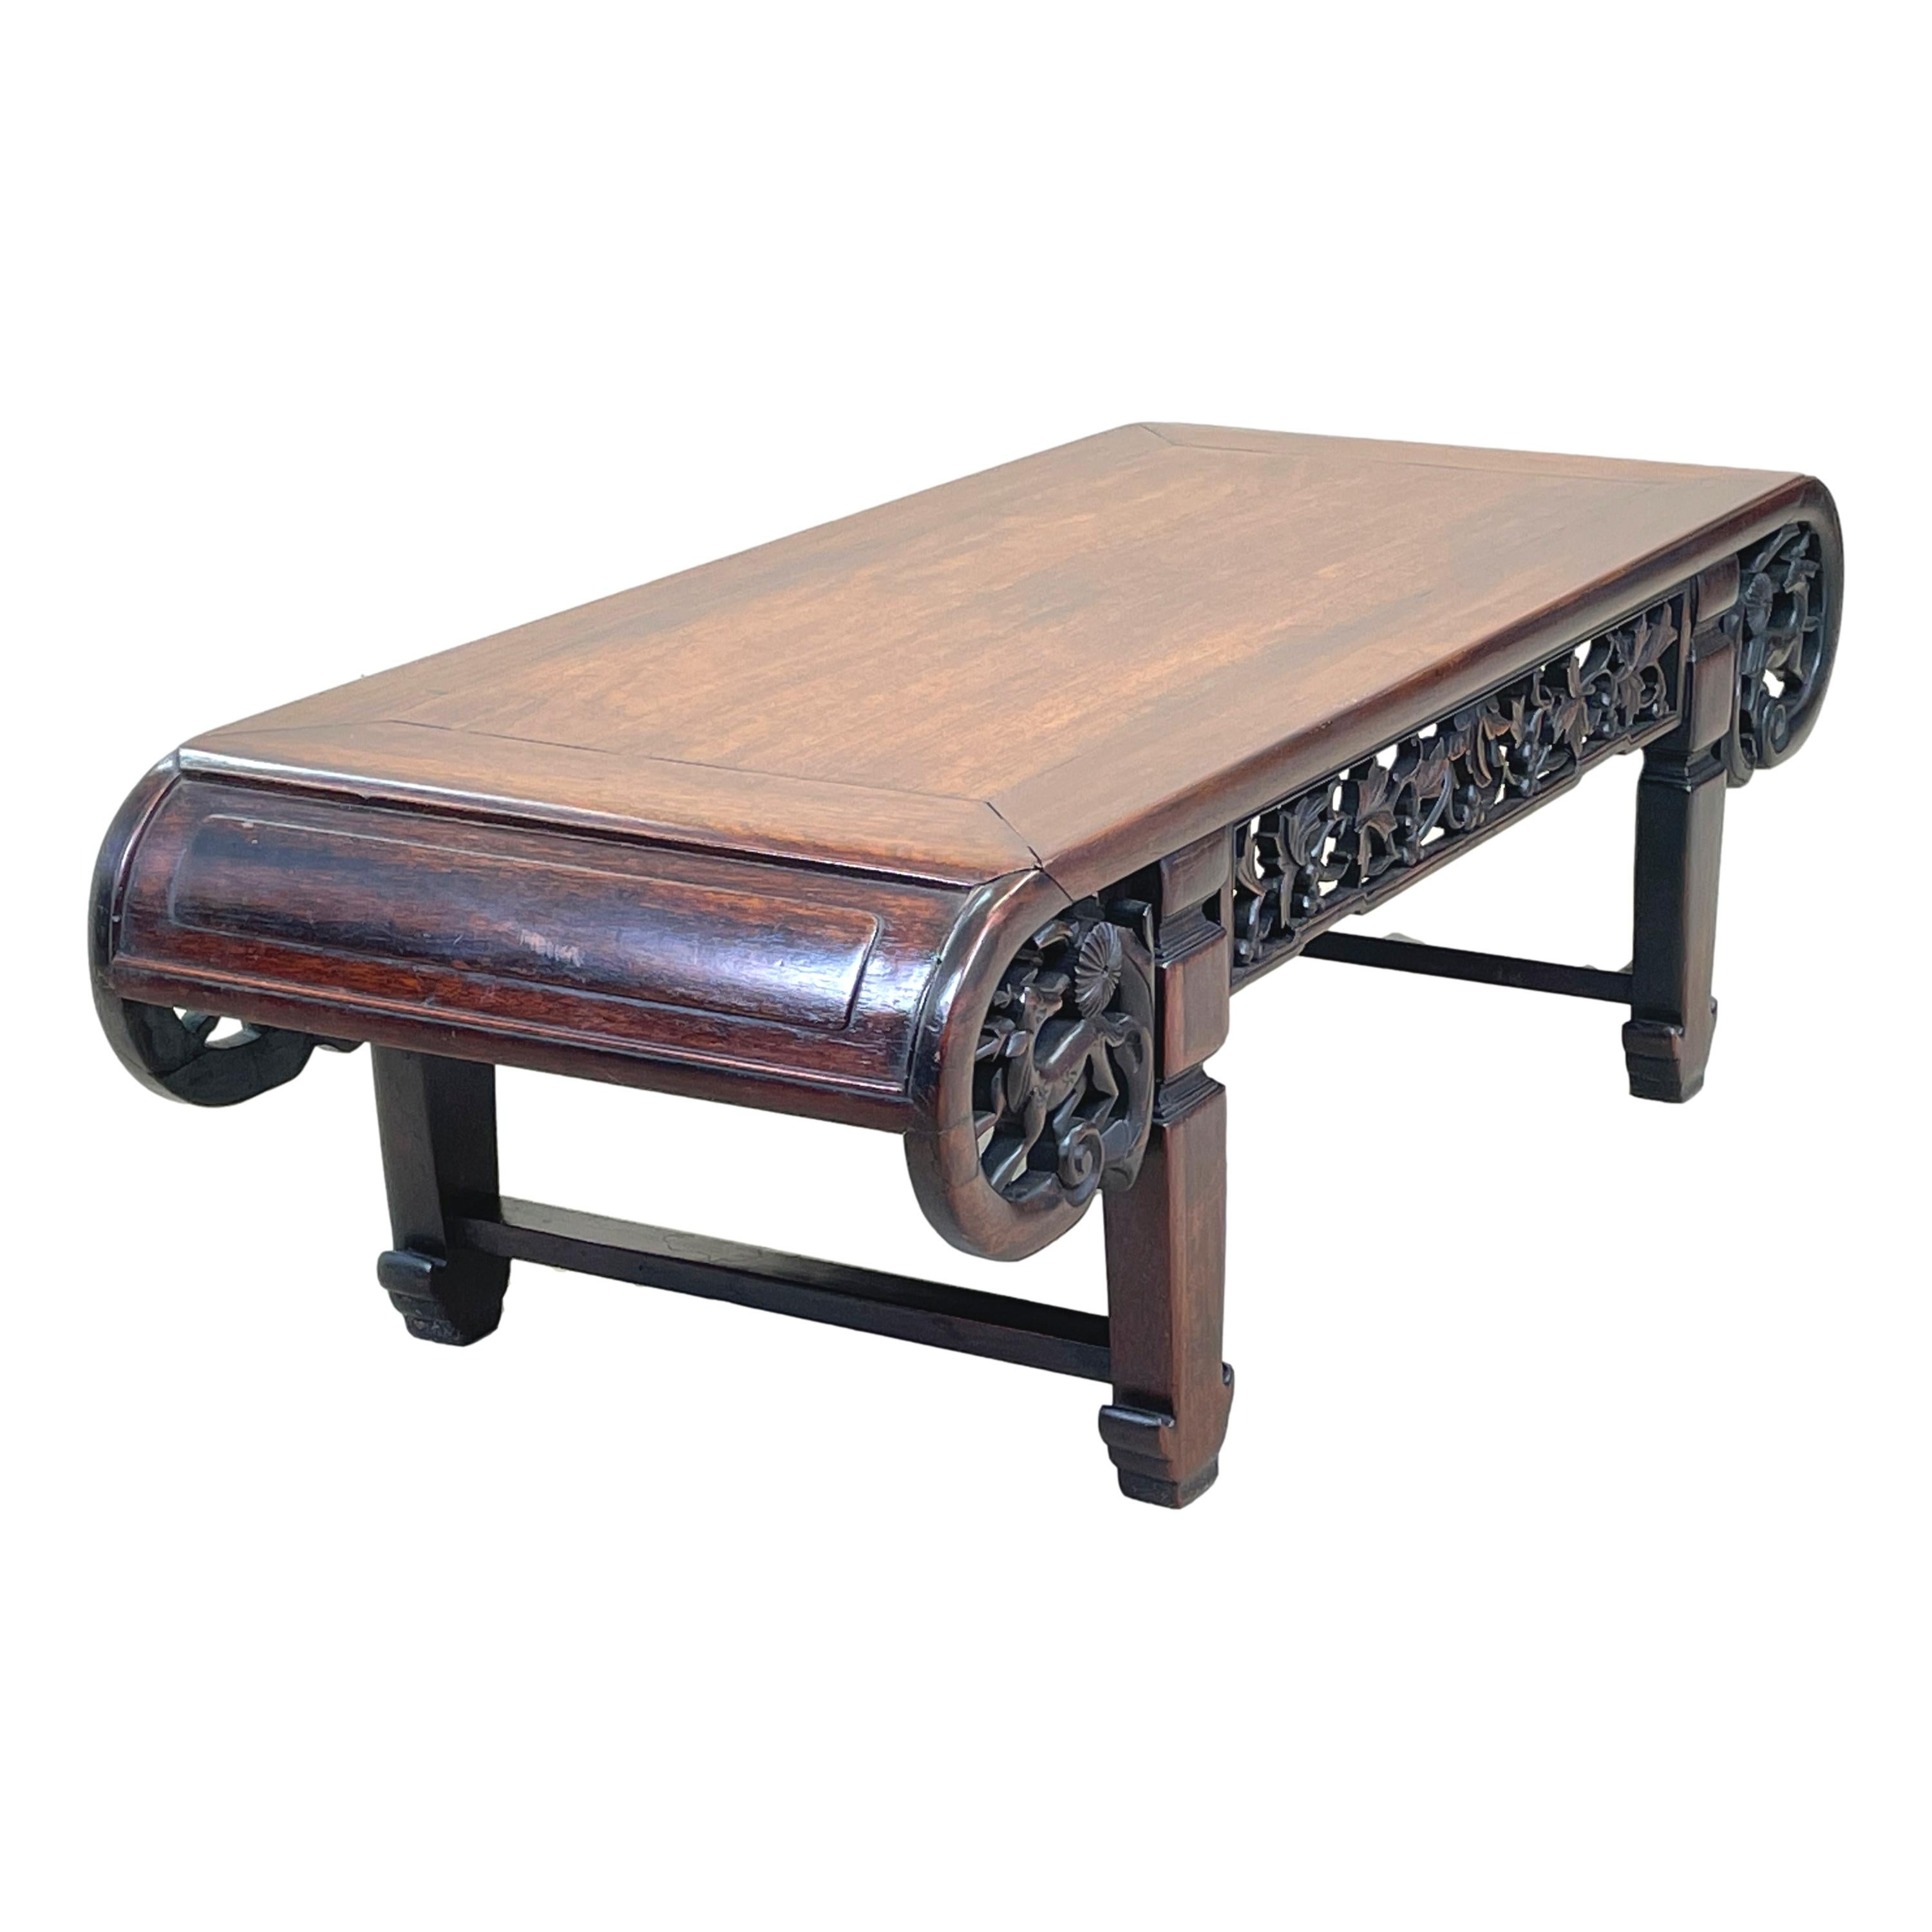 An attractive and very good quality mid 19th century
oriental hardwood coffee table, of unusual design
similar to an opium type table, having well figured
panelled top with elegant scrolling ends and pierced
carved fretwork decoration to frieze